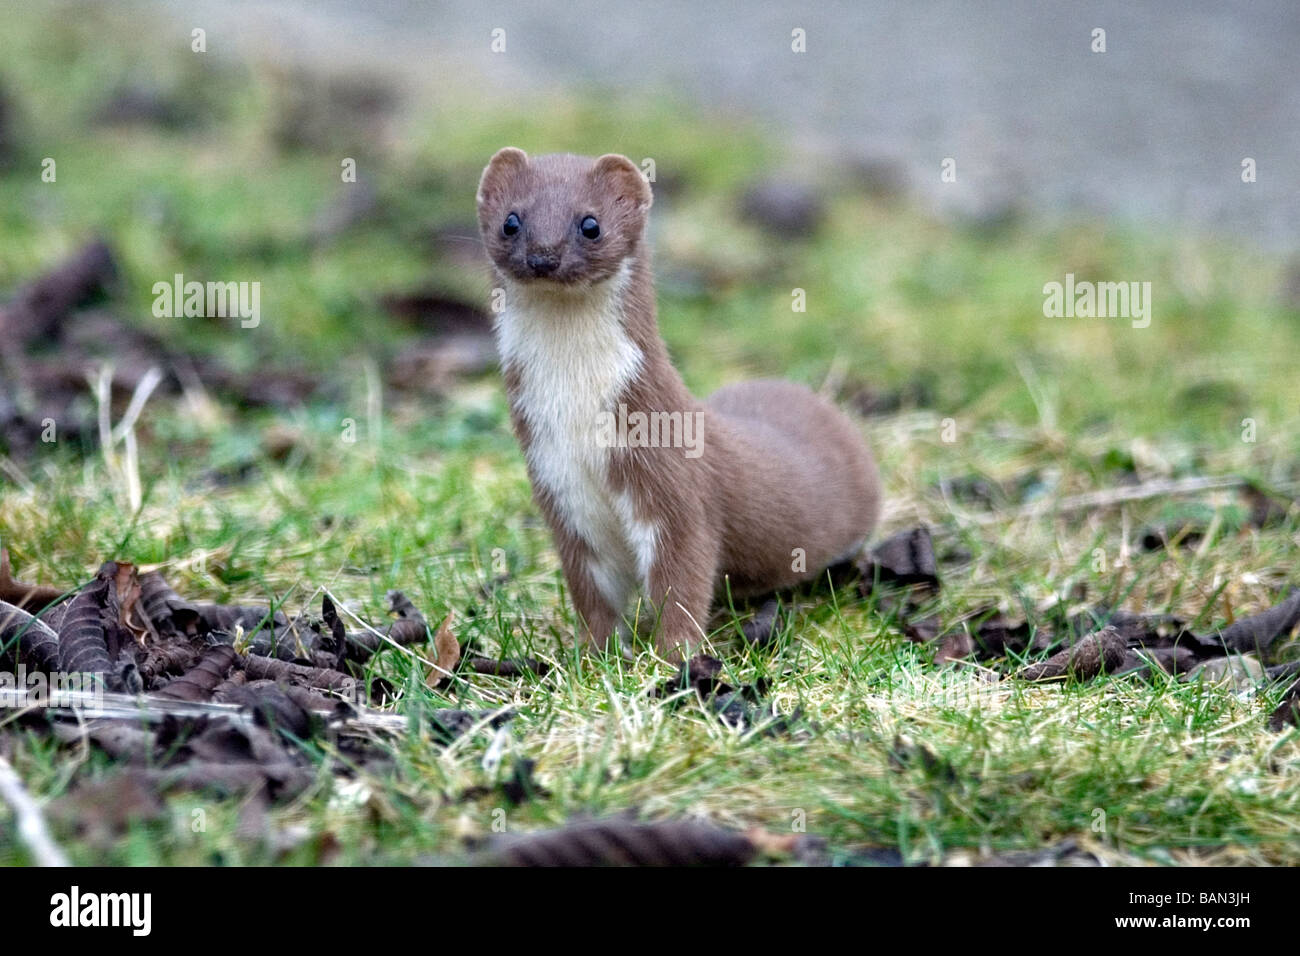 A Weasel on the search for a mouse at Potteric Carr nature reserve in Yorkshire, England. Our smallest carnivore. Stock Photo